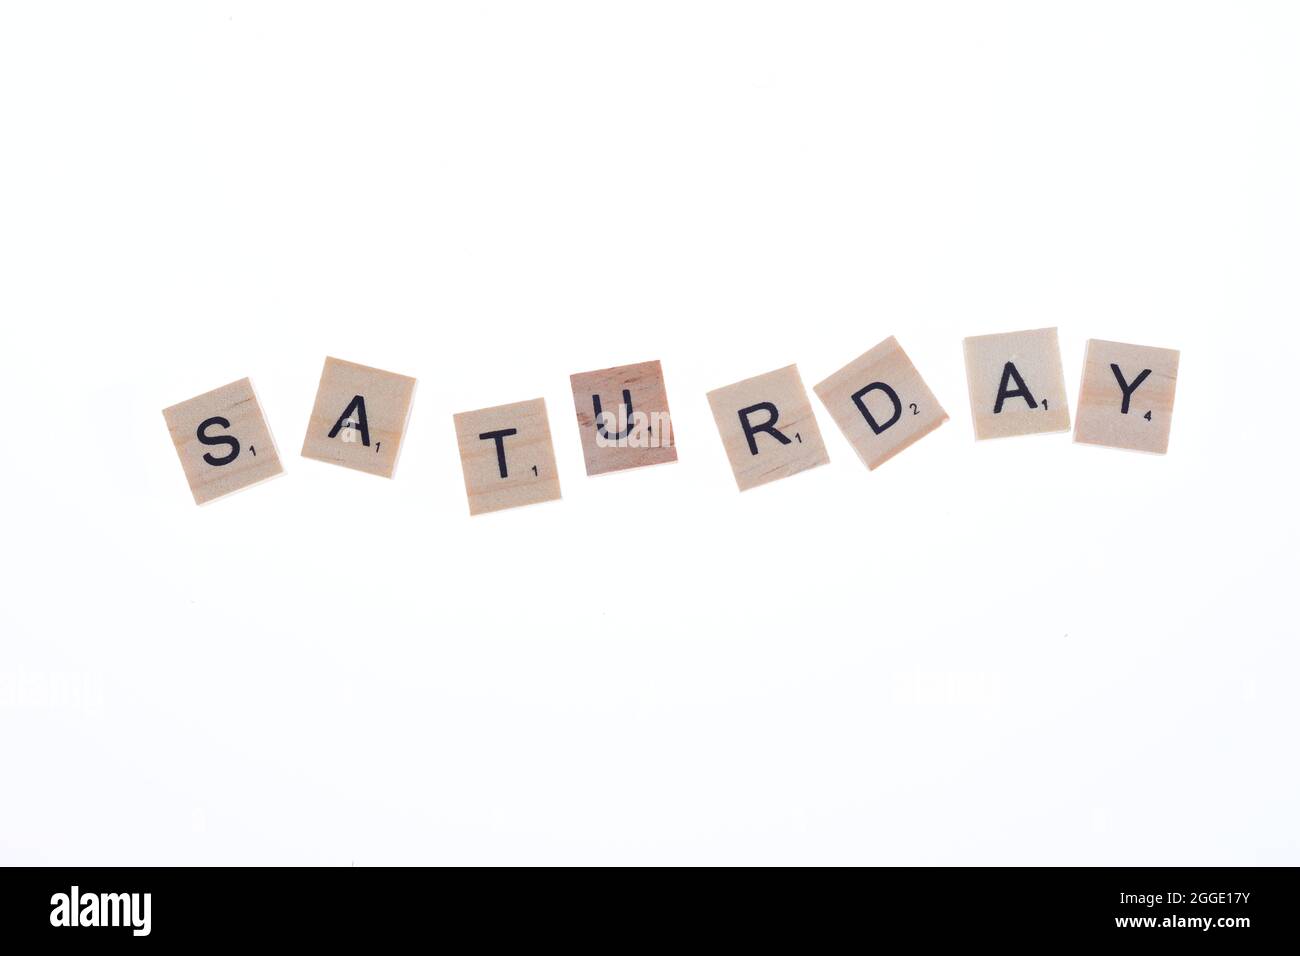 Word saturday arranged from wooden blocks on white background. Stock Photo